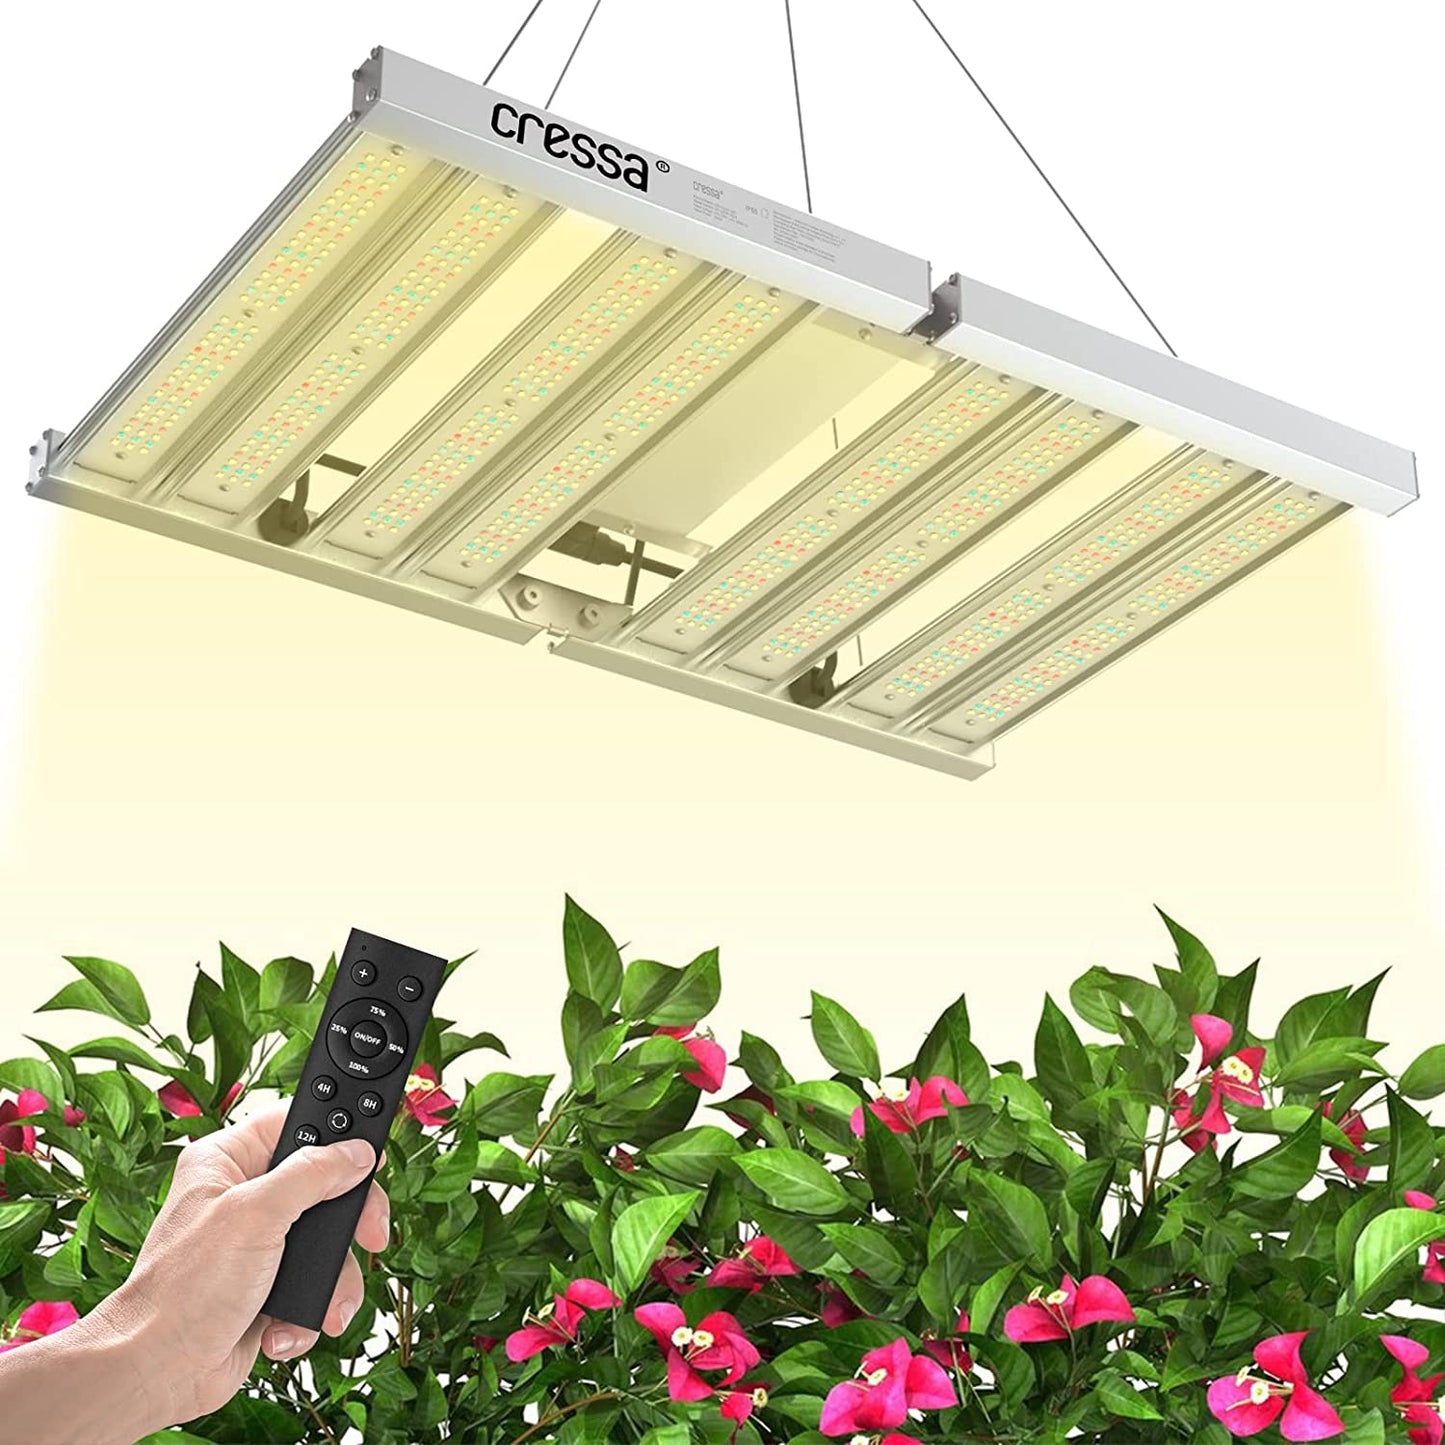 Grow Light for Indoor Plant, Horizontal Plant Growth Lamp for Indoor Plants with Red/Blue Spectrum, Full Spectrum Adjustable Gooseneck, 3/9/12H Timer 3 Switch Modes, 3 Head